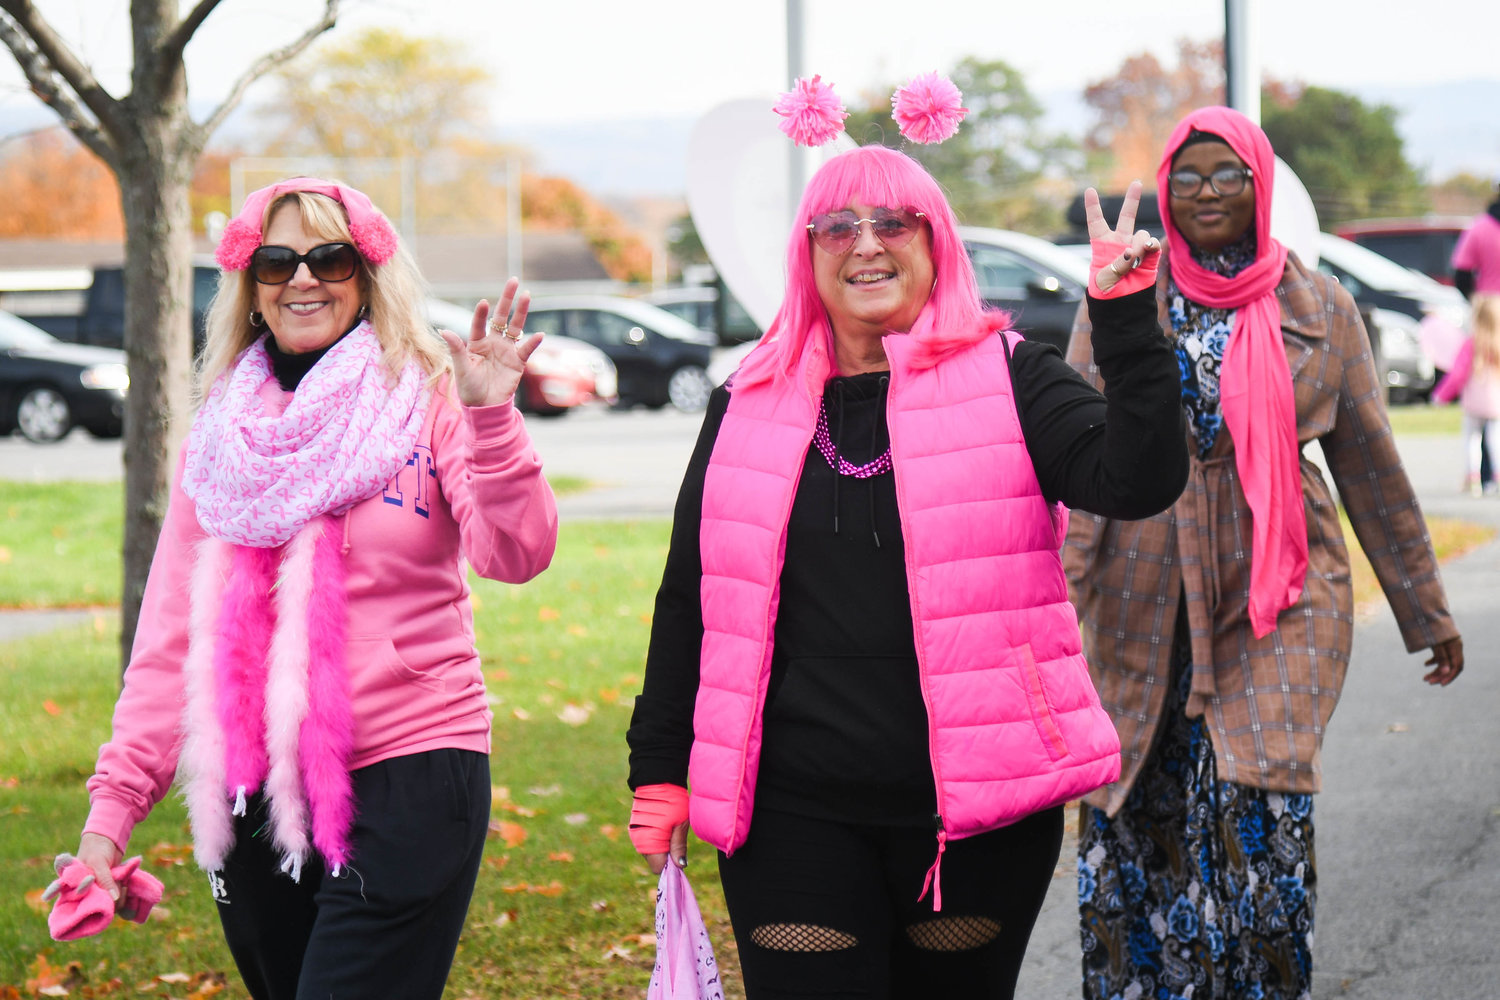 There was plenty of pink during the Making Strides Against Breast Cancer walk presented by Upstate Cancer Center Sunday at Mohawk Valley Community College in Utica.